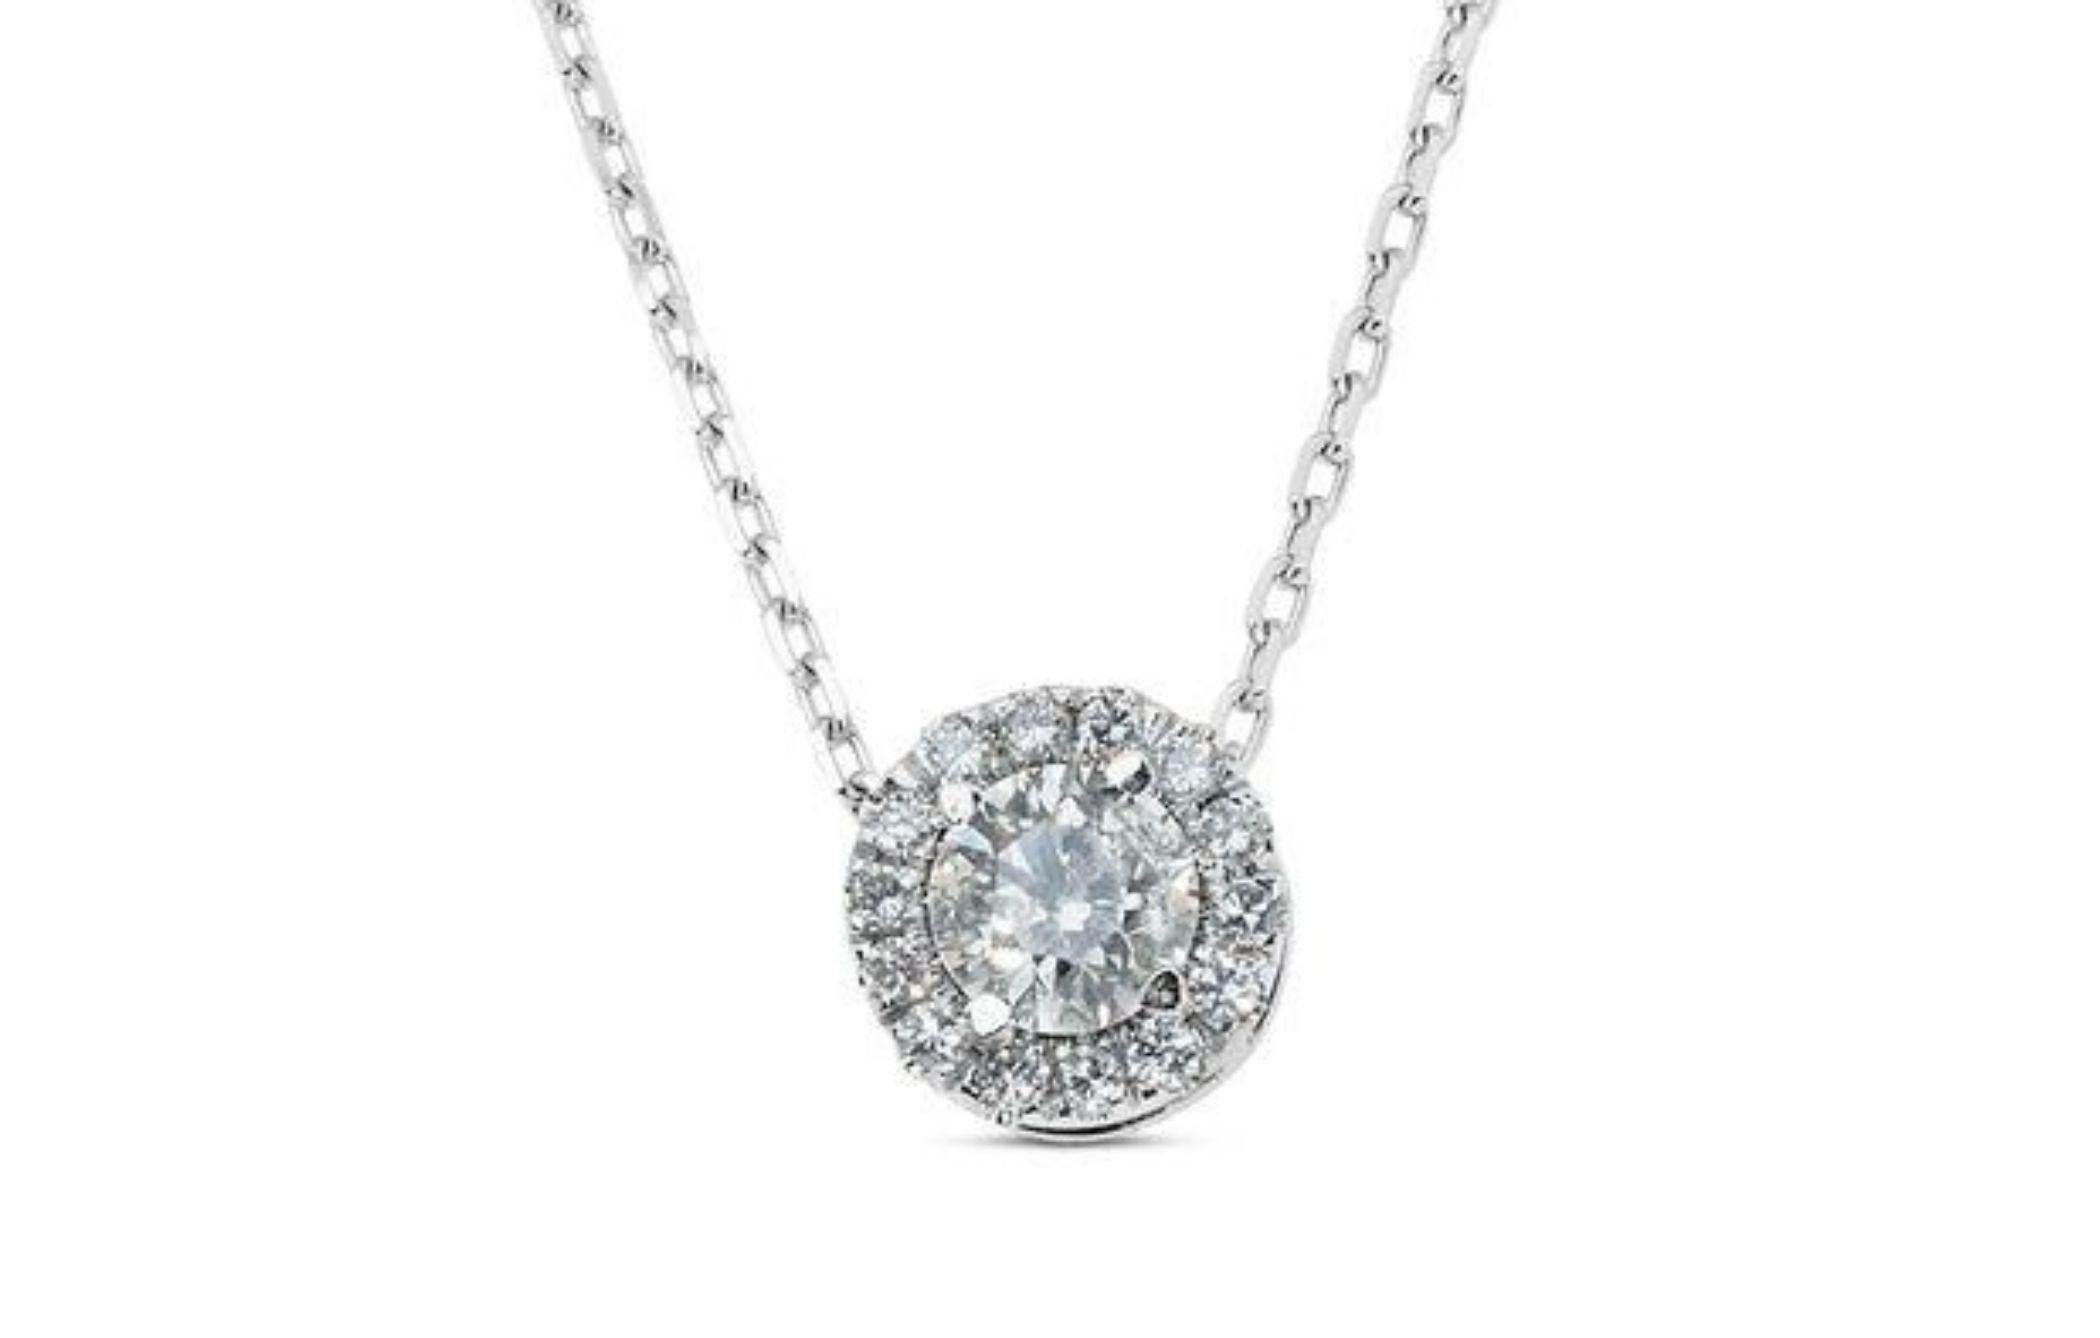 Captivate with Elegance: 1.15 Carat Round Brilliant Diamond Necklace. Own a piece of timeless elegance with this captivating diamond necklace, featuring a mesmerizing 0.7 carat round brilliant natural diamond centerpiece. Surrounded by a halo of